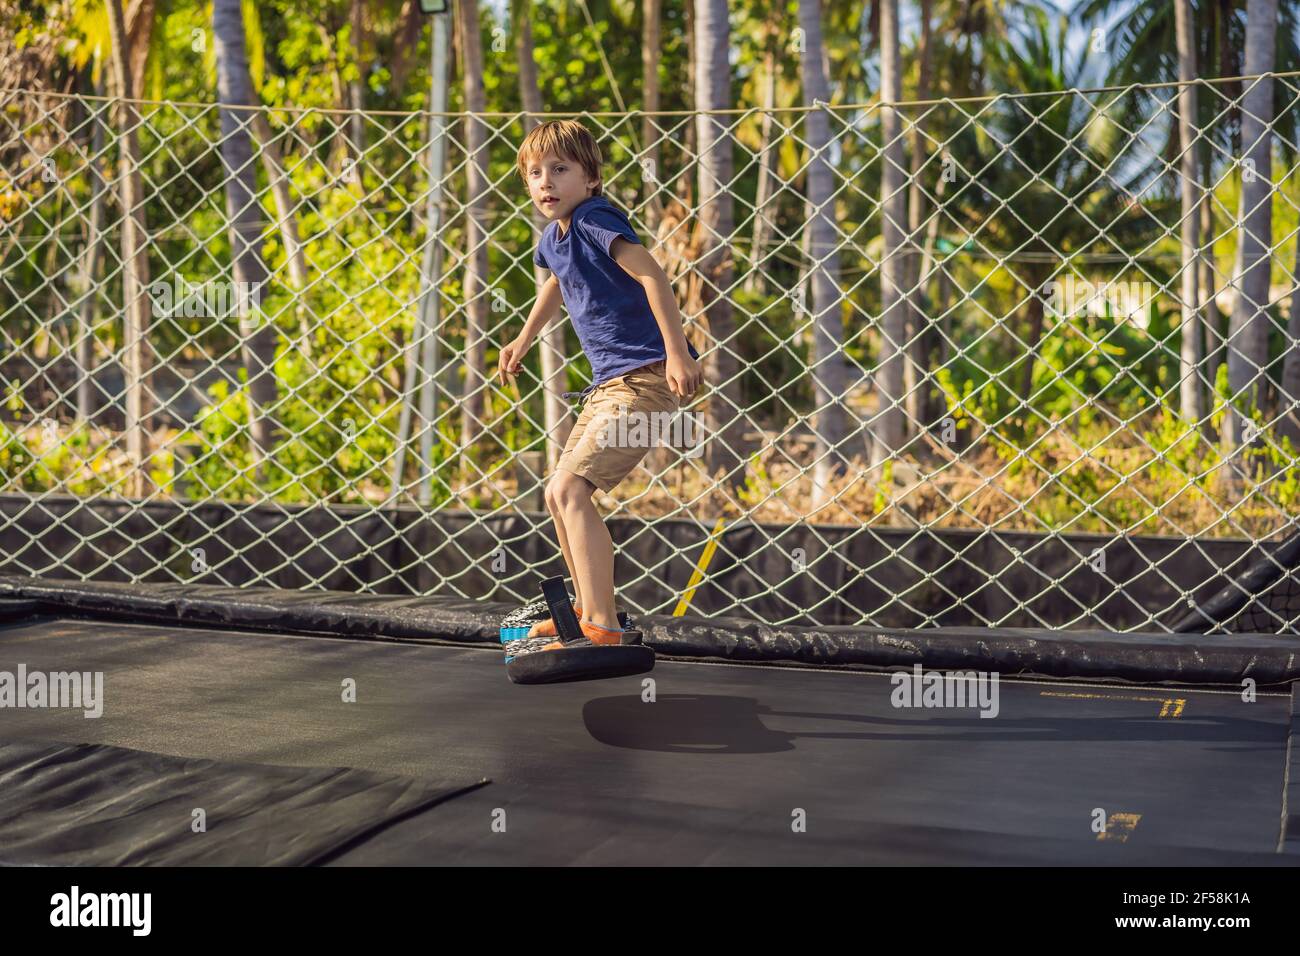 Happy boy on a soft board for a trampoline jumping on an outdoor trampoline,  against the backdrop of palm trees. The trampoline board is like a Stock  Photo - Alamy